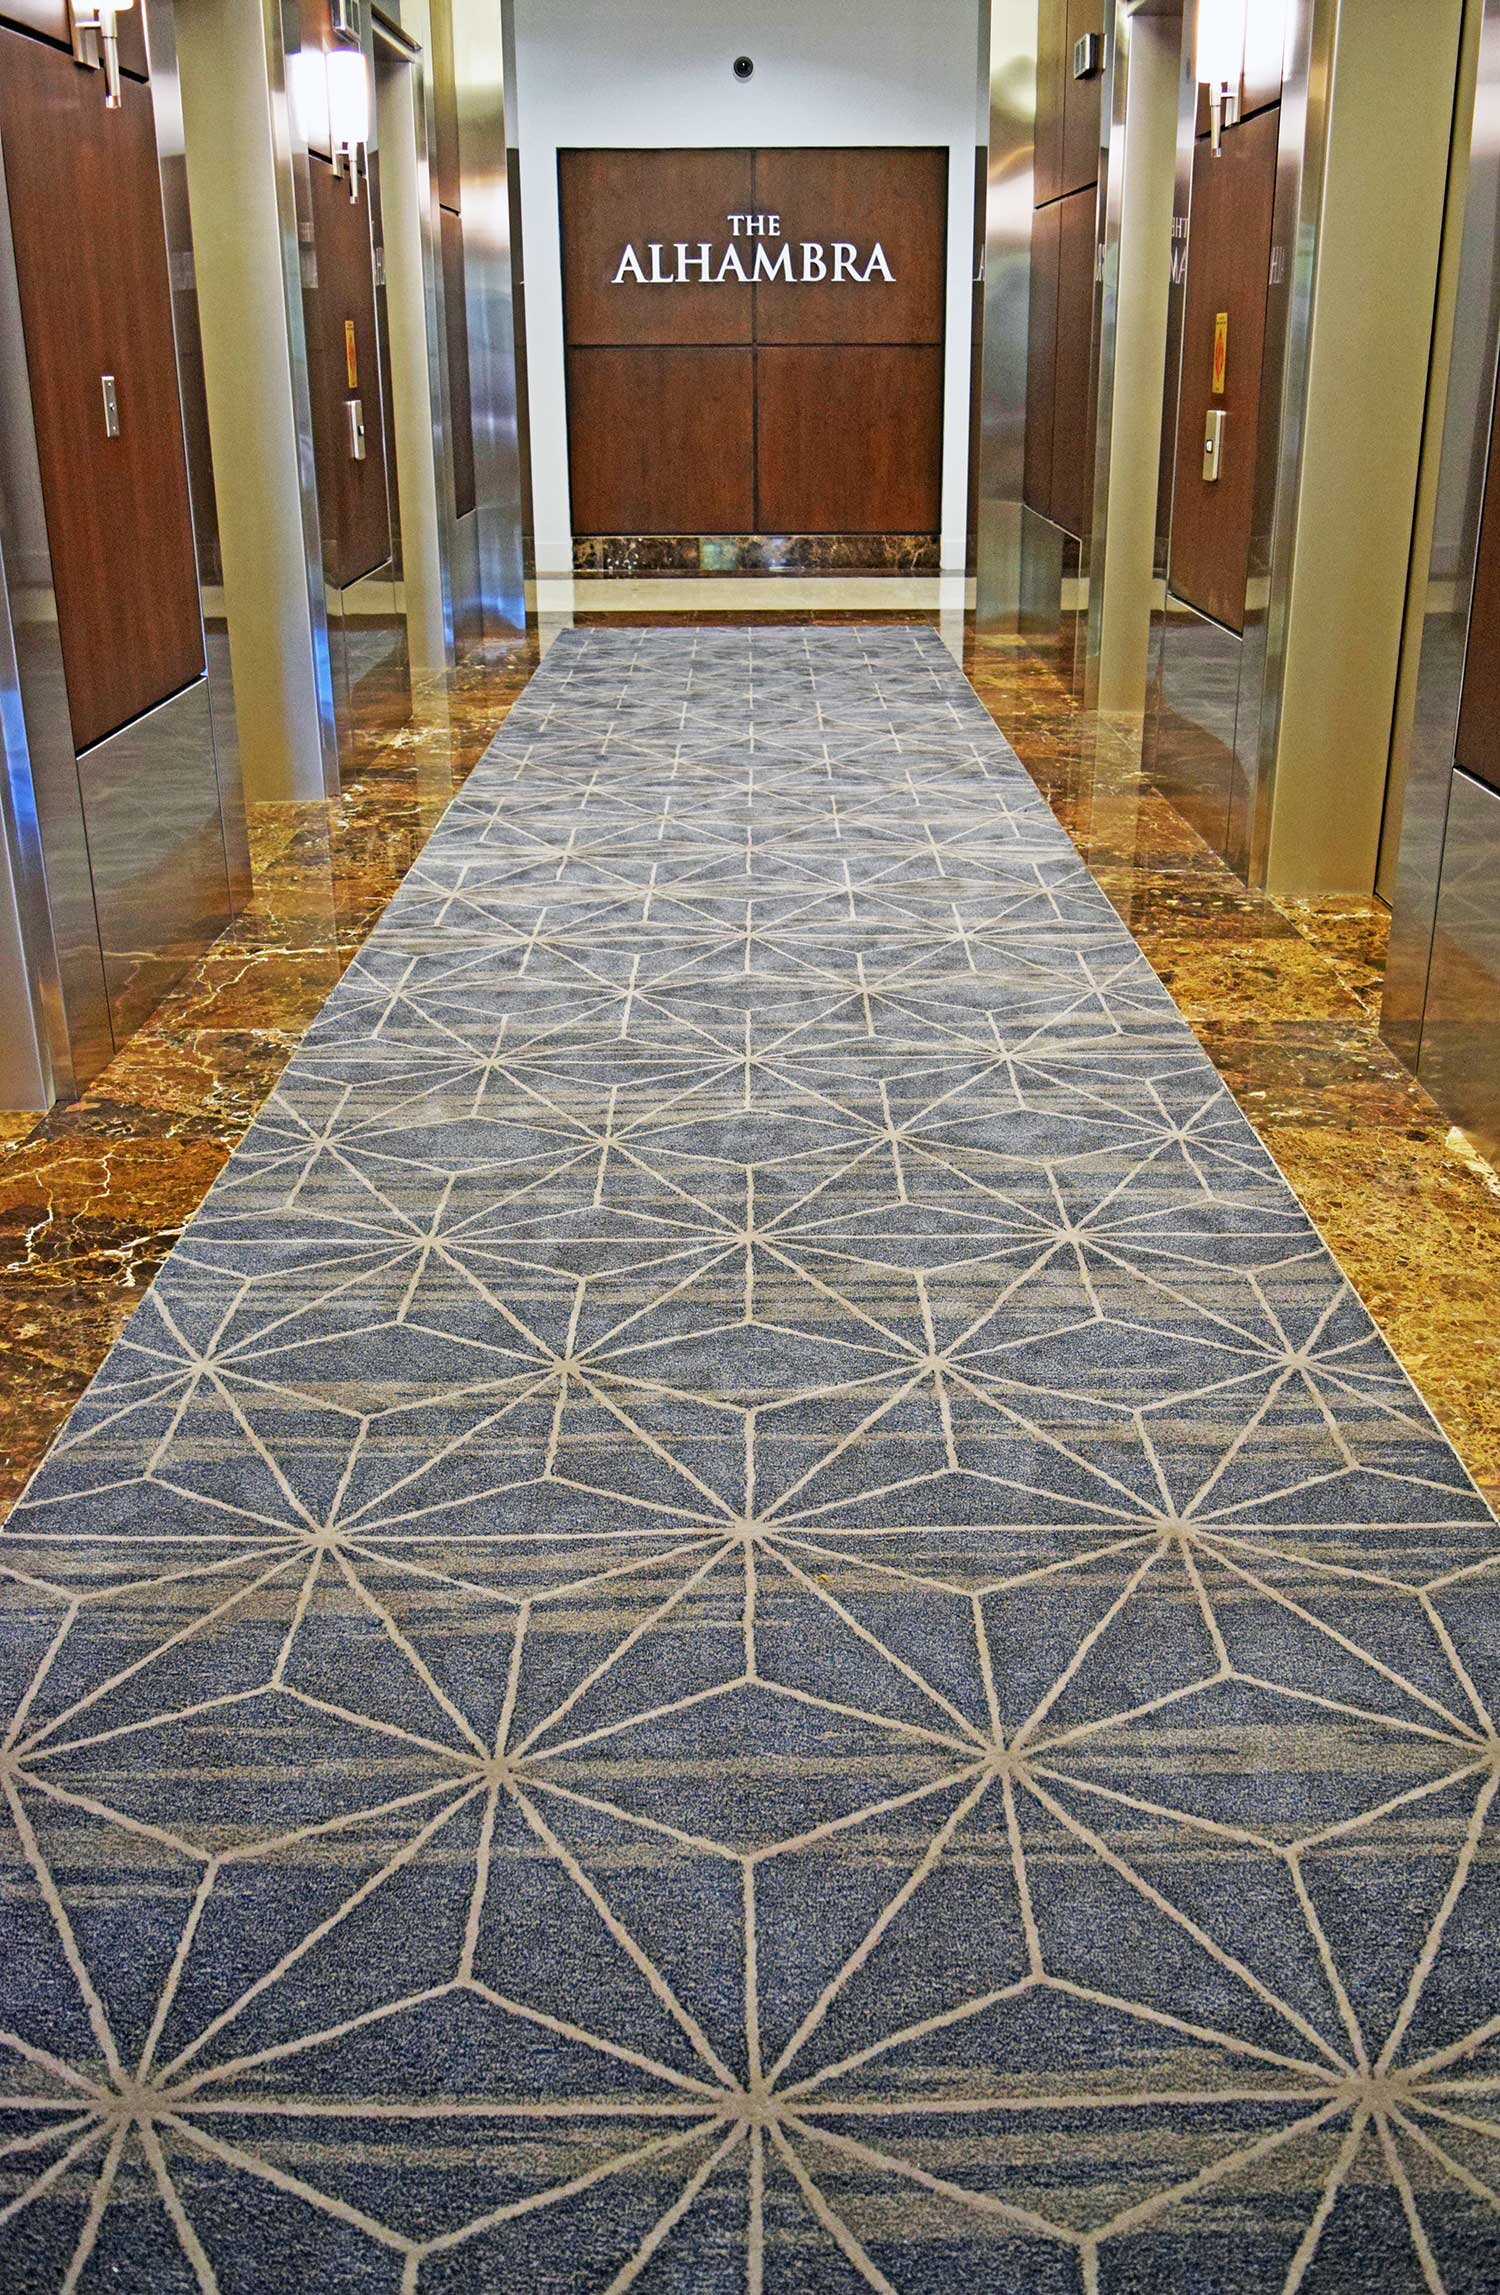 Customized Hand-Tufted Corporate Area Rugs for your unique needs